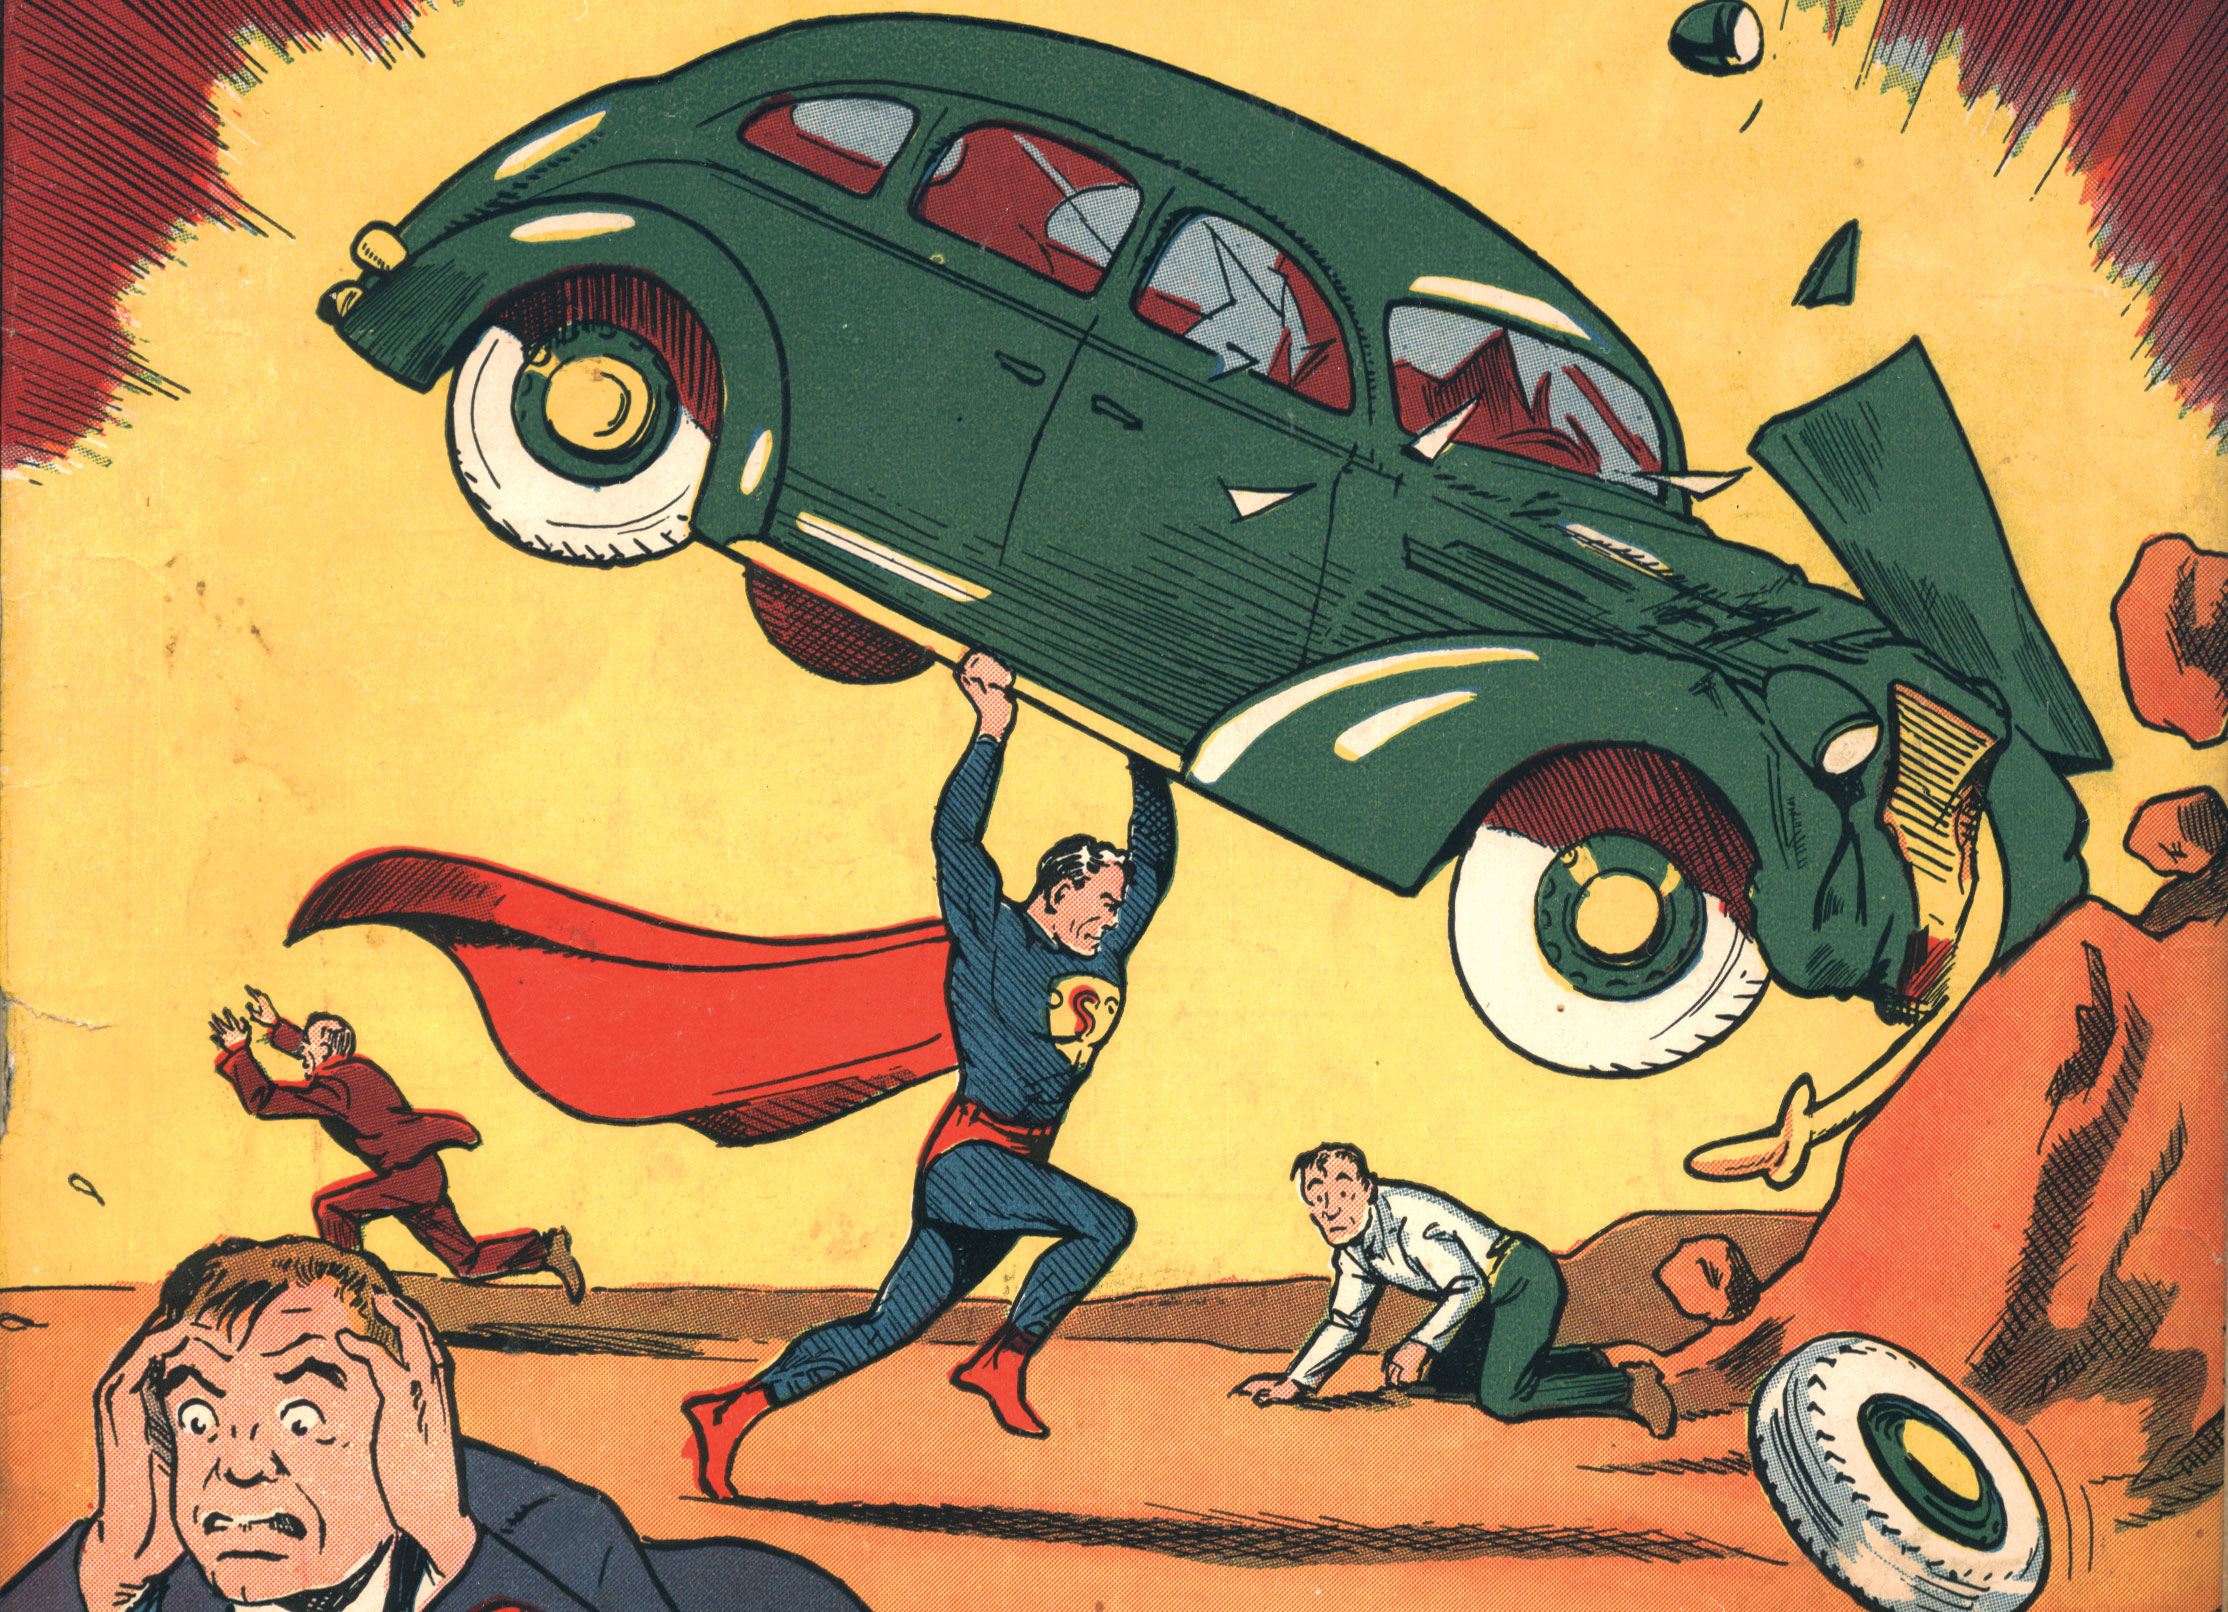 A CGC-certified 5.0 copy of Action Comics #1, featuring the first appearance of Superman, sold for $658,000 at New York-based online comic book auction house ComicConnect.com on Tuesday, March 24, 2015. Image courtesy of ComicConnect.com.